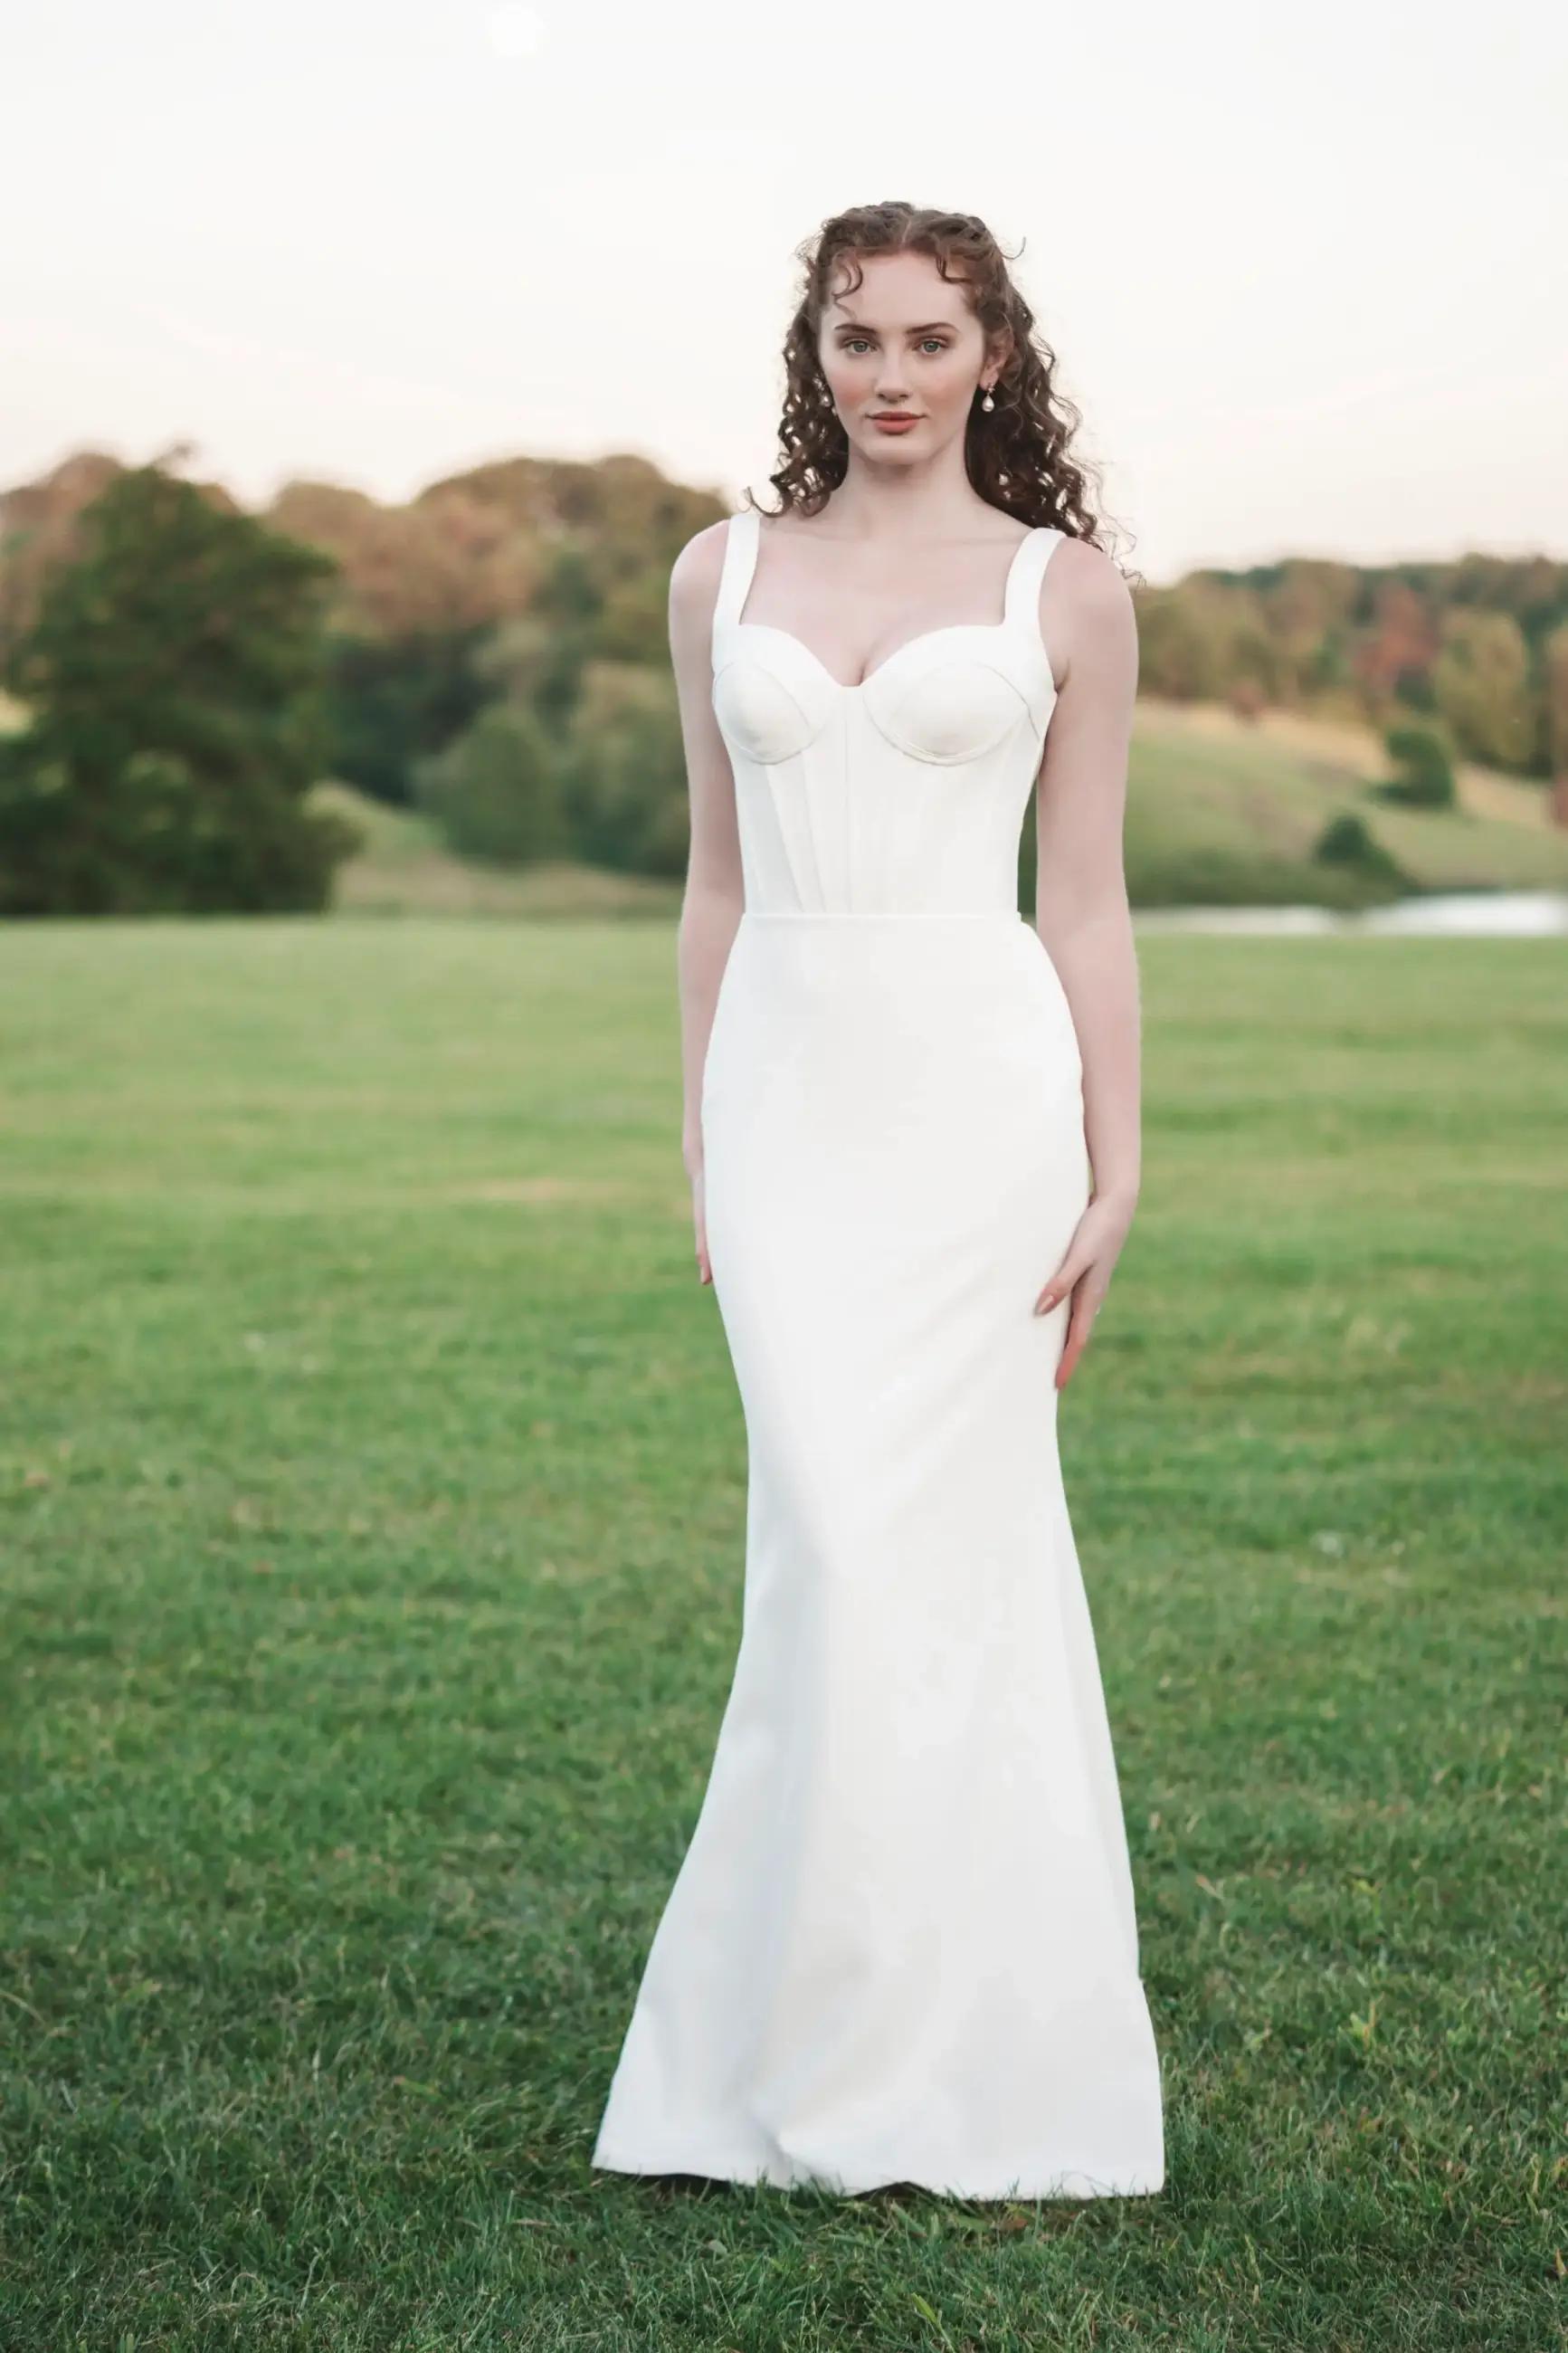 Designer Spotlight: Allure Bridals&#39; Diverse Collections, Including the Bridgerton-Inspired Gowns Image